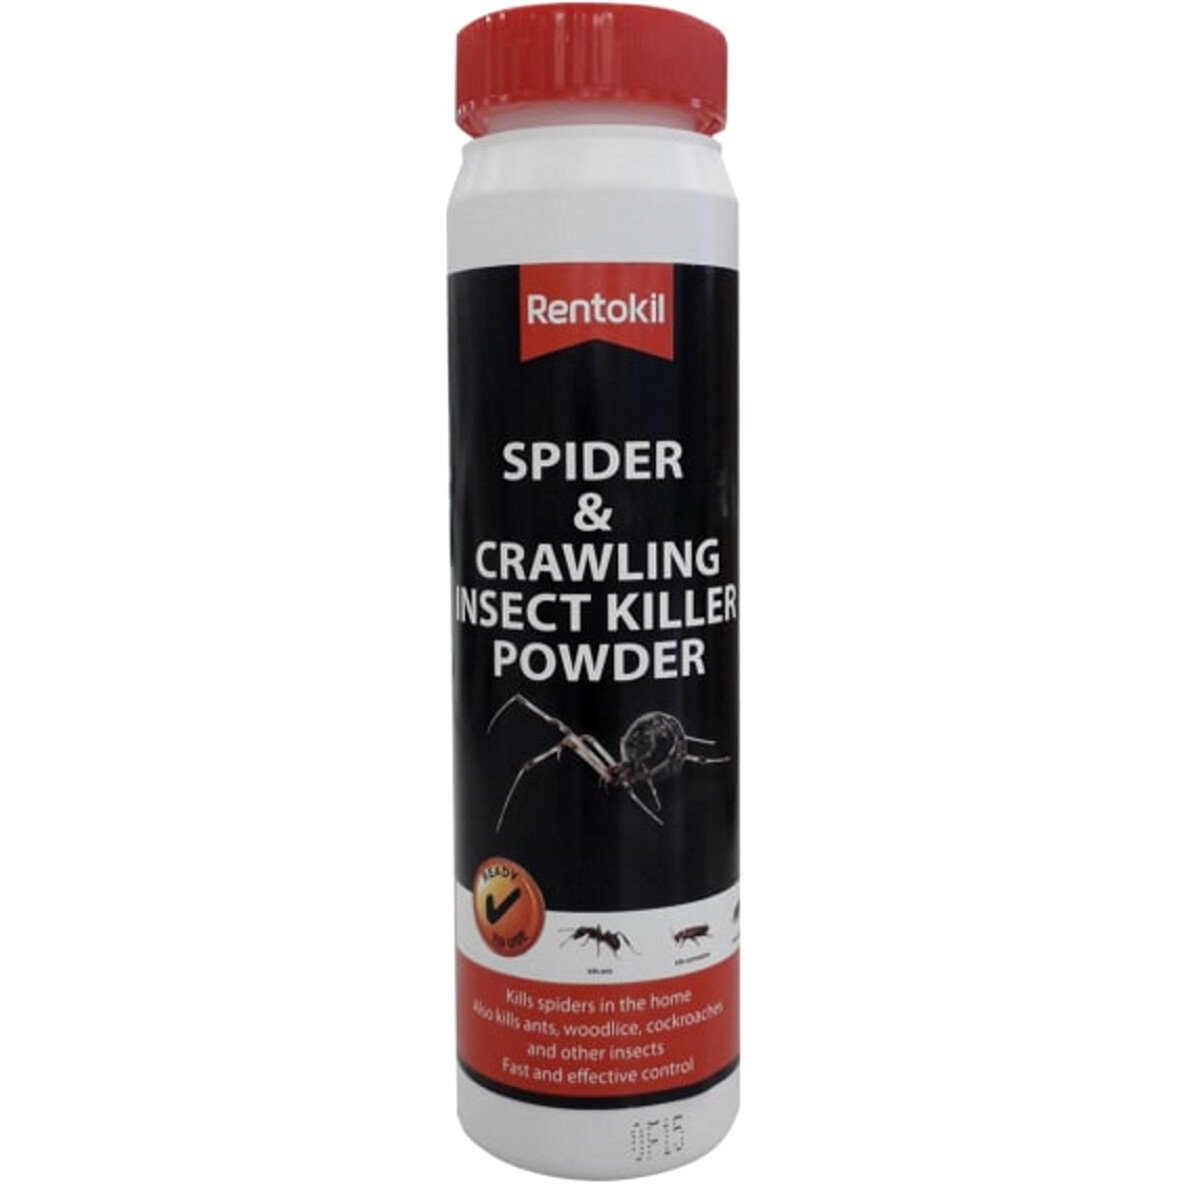 Rentokil PSS209 Spider and Crawling Insect Powder 150g RKLPSS209